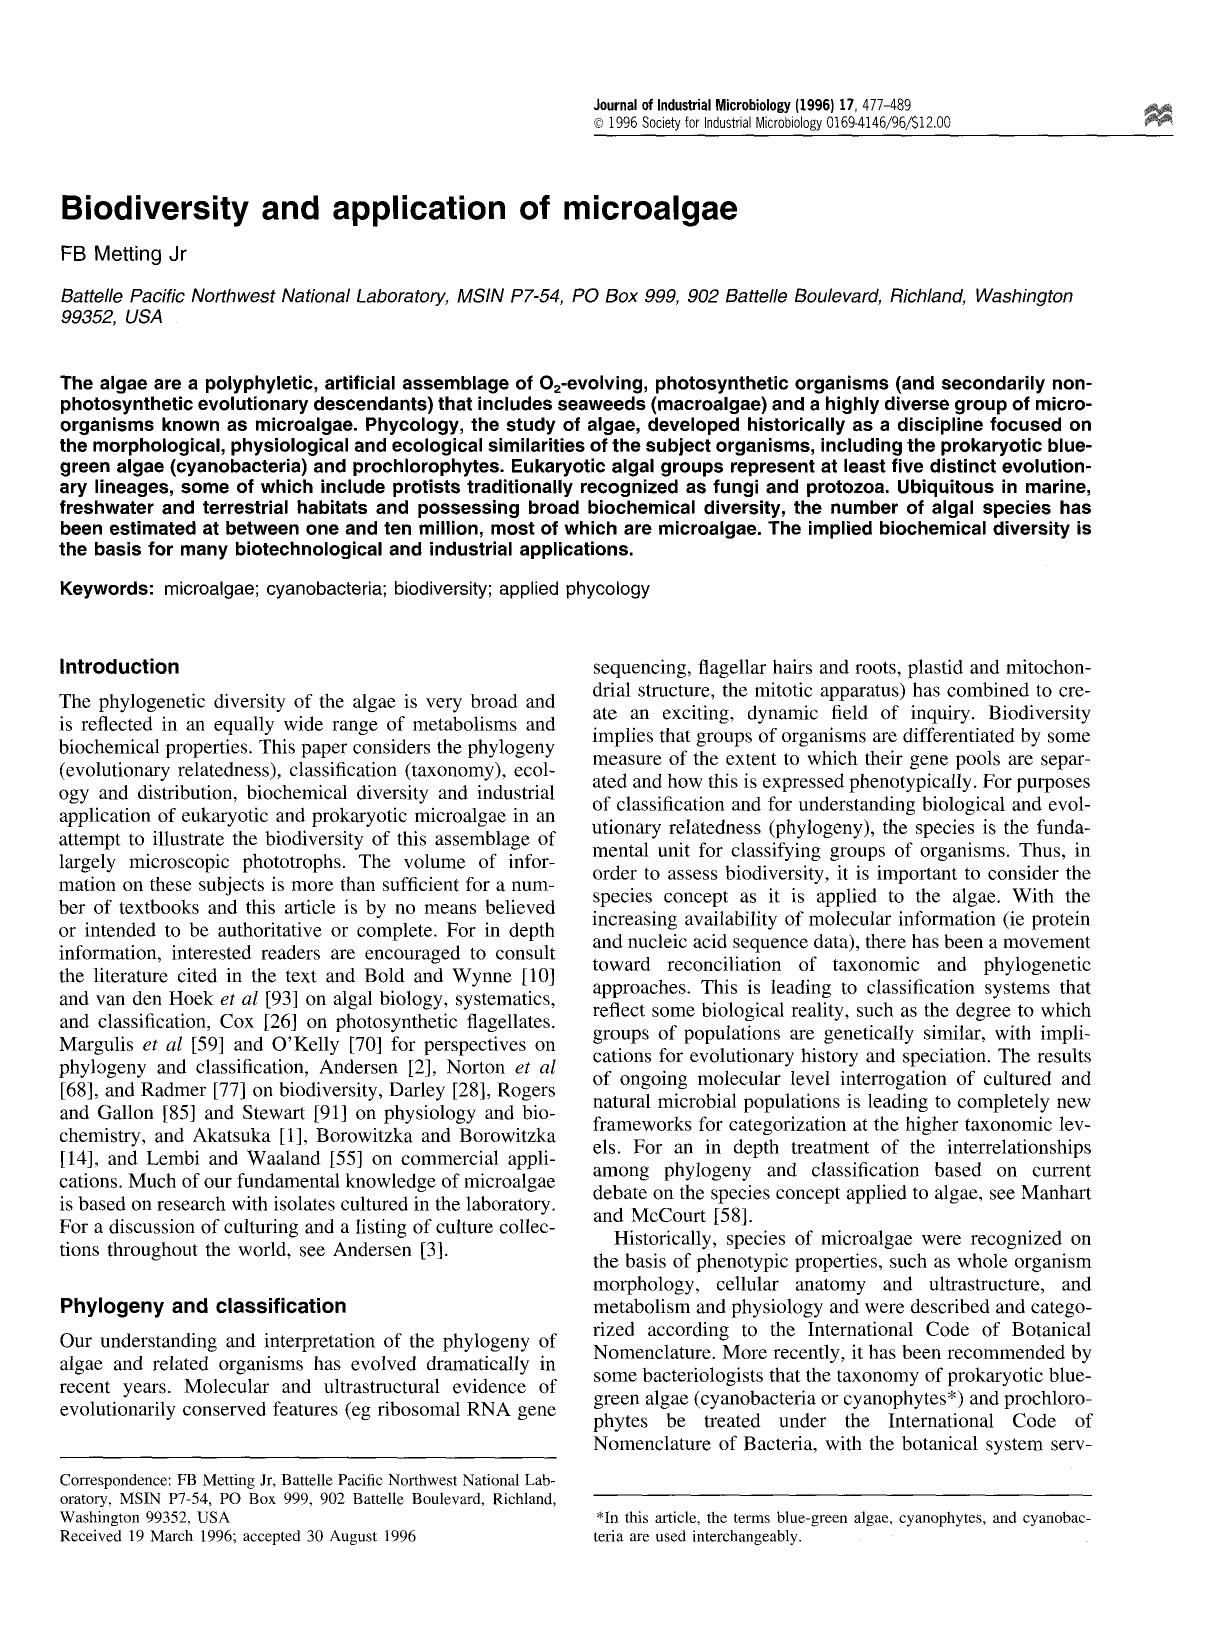 Biodiversity and application of microalgae by Unknown